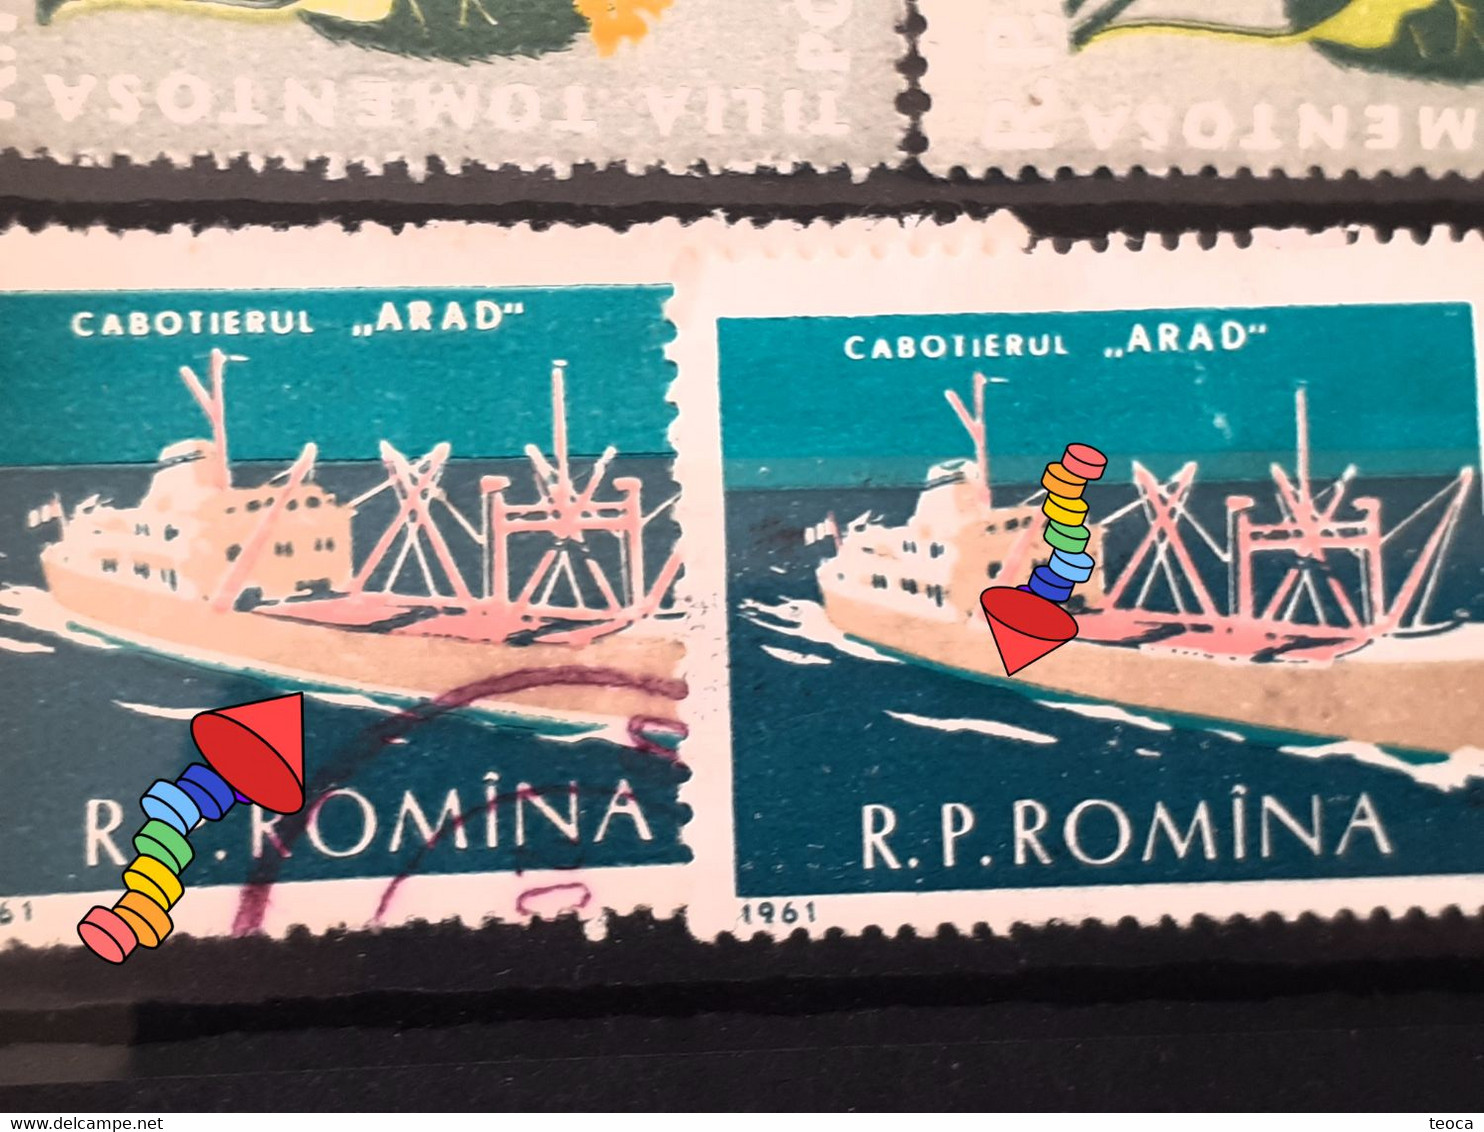 stamps errors Romania lot 7 stamps  printed with errors  see images used